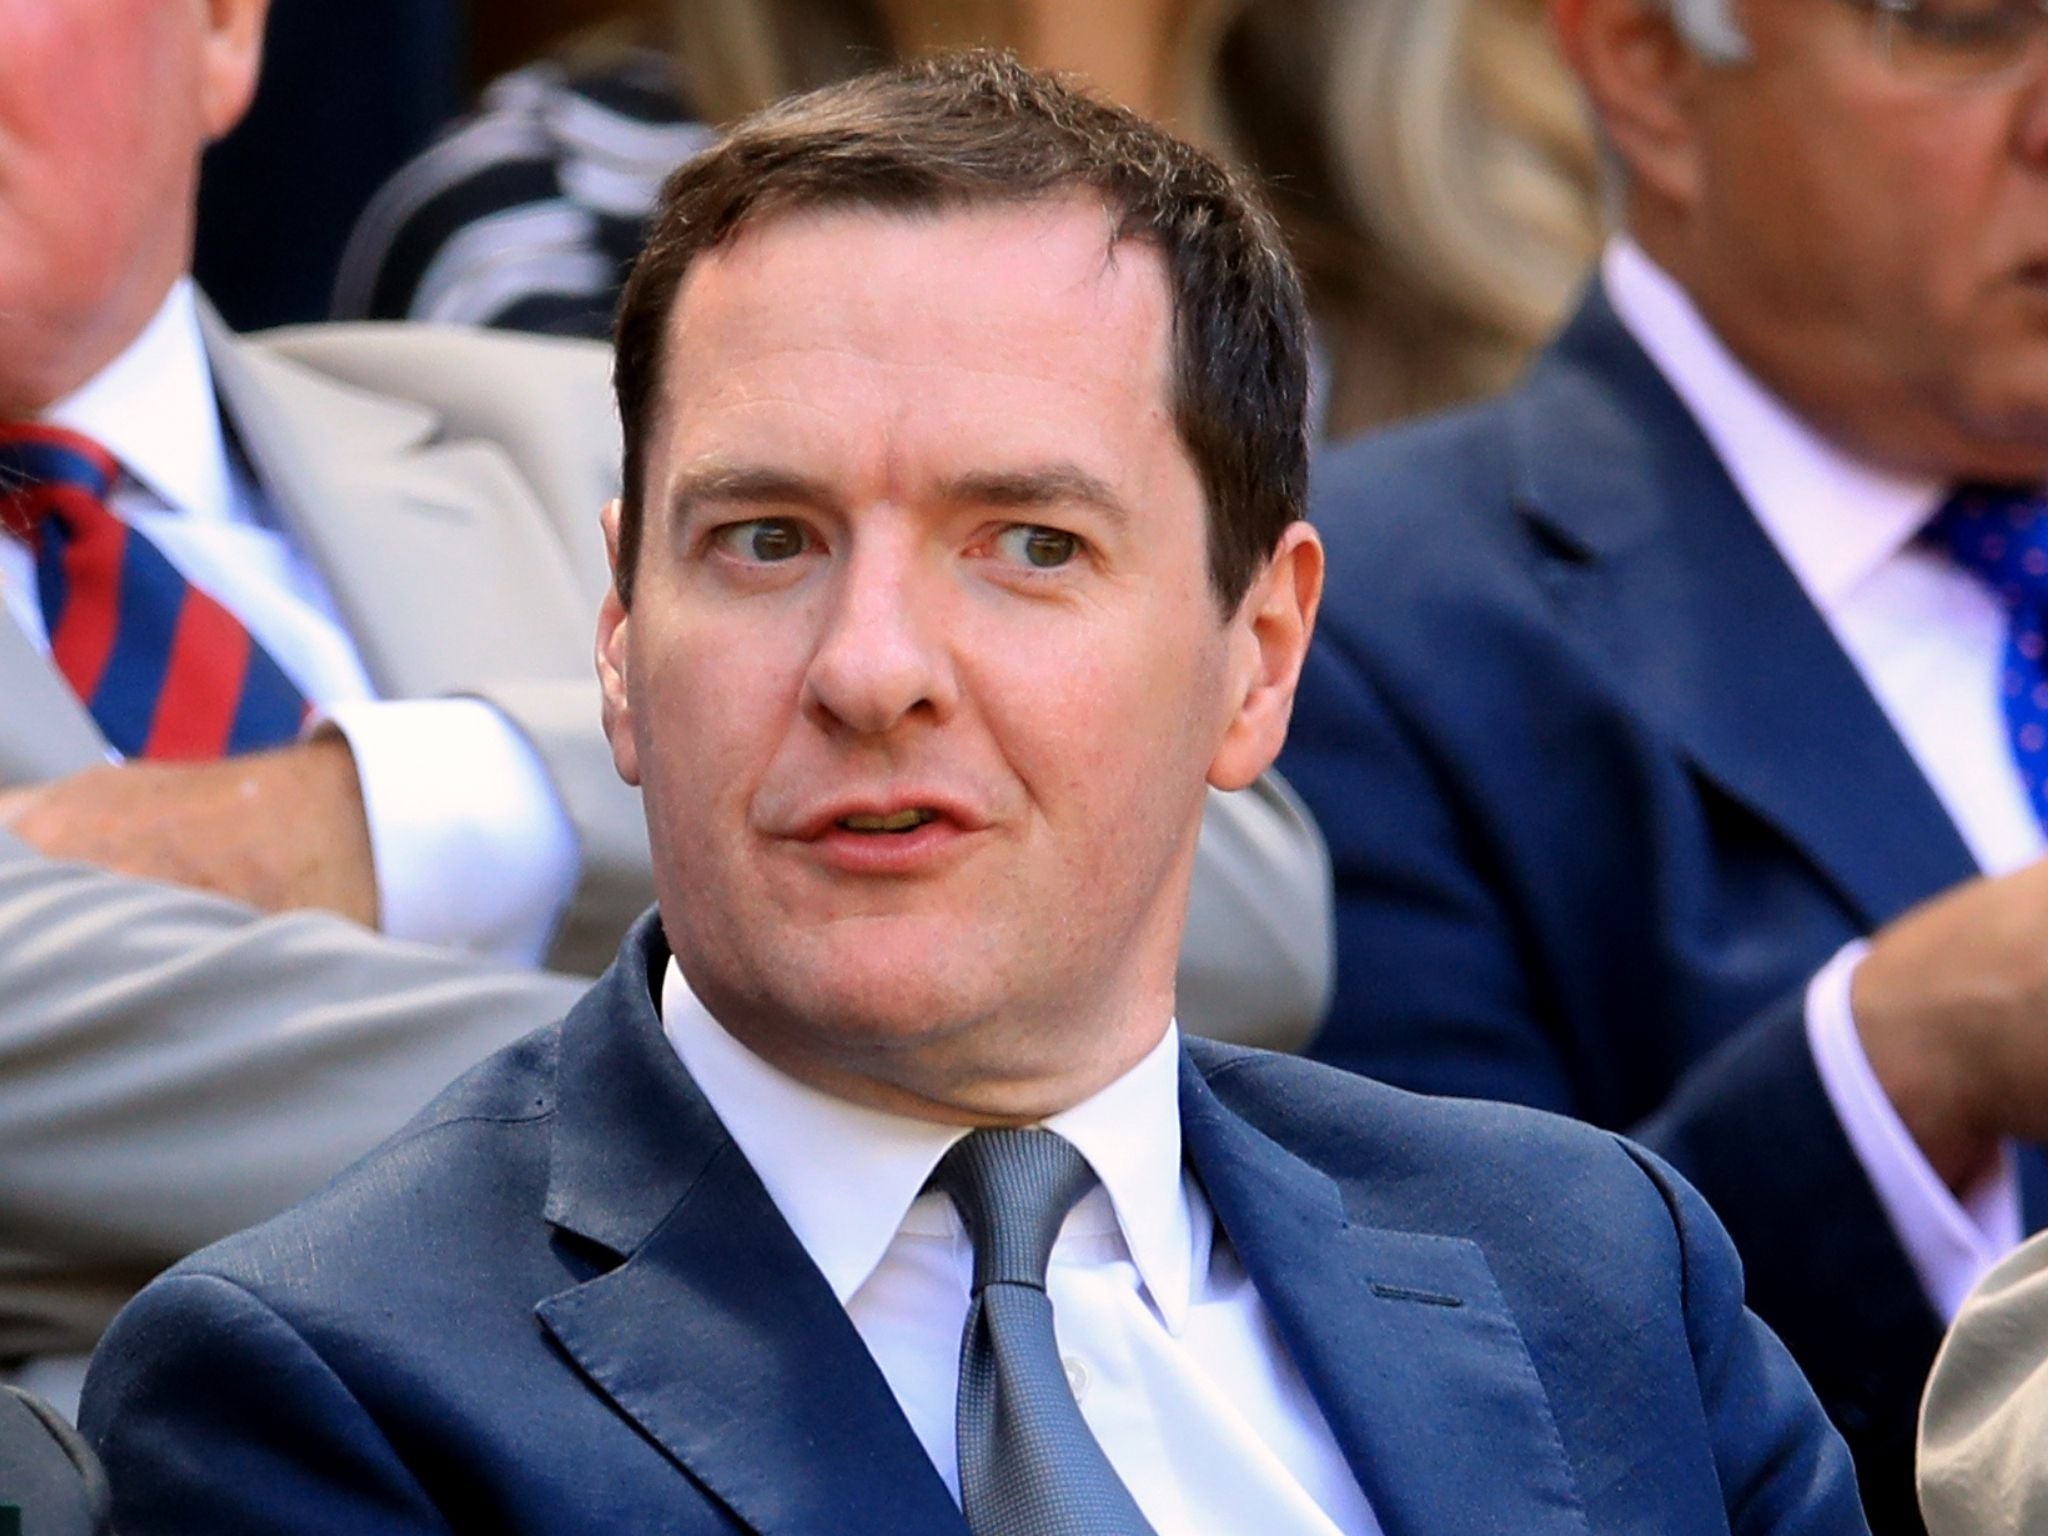 Mr Osborne is set to step down from positions at the Evening Standard and Blackrock next month